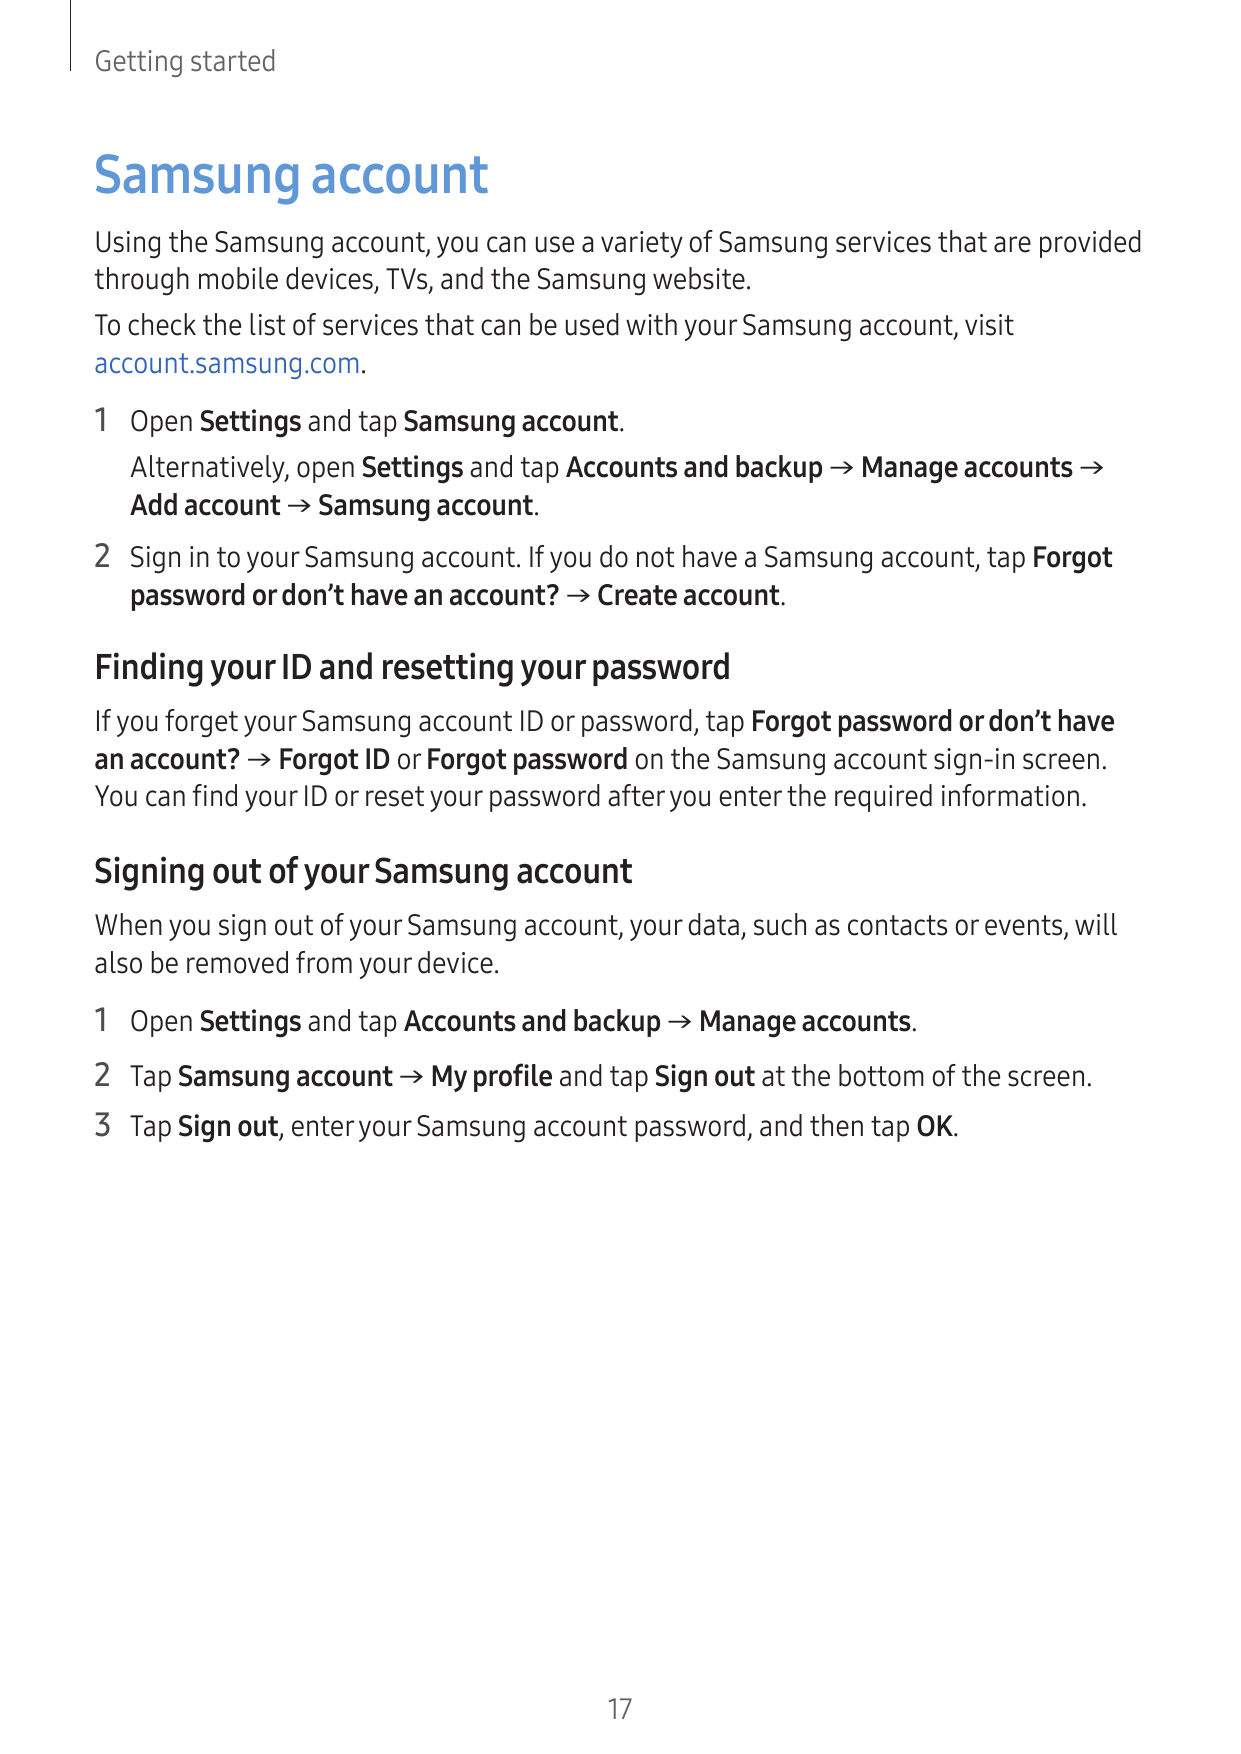 Getting startedSamsung accountUsing the Samsung account, you can use a variety of Samsung services that are providedthrough mobi